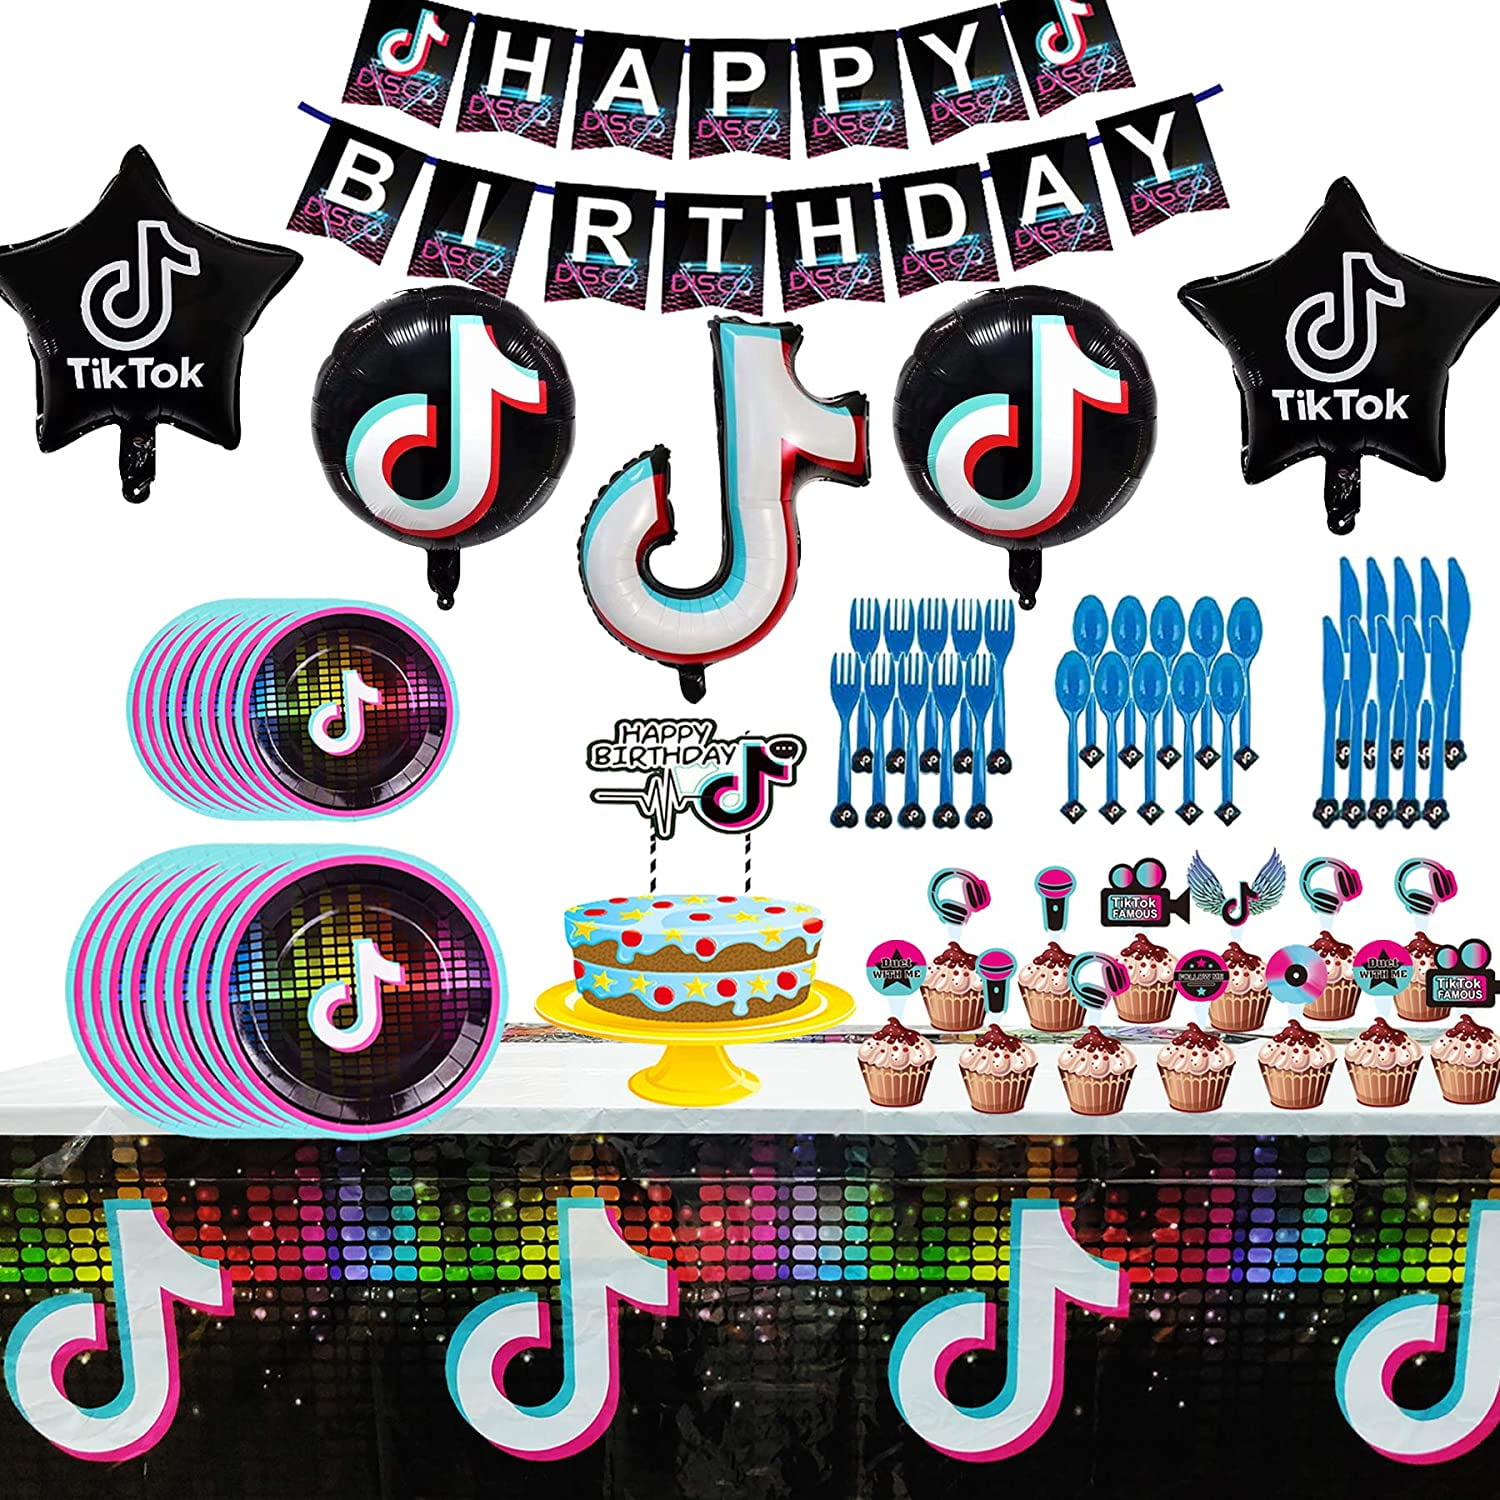 Tik Tok Party Supplies Birthday Decorations Tik Tok Party Favors Banner Cake Topper Plates Tablecloth Knife Fork Spoon And Foil Balloon For Kids Themed Party Walmart Com Walmart Com